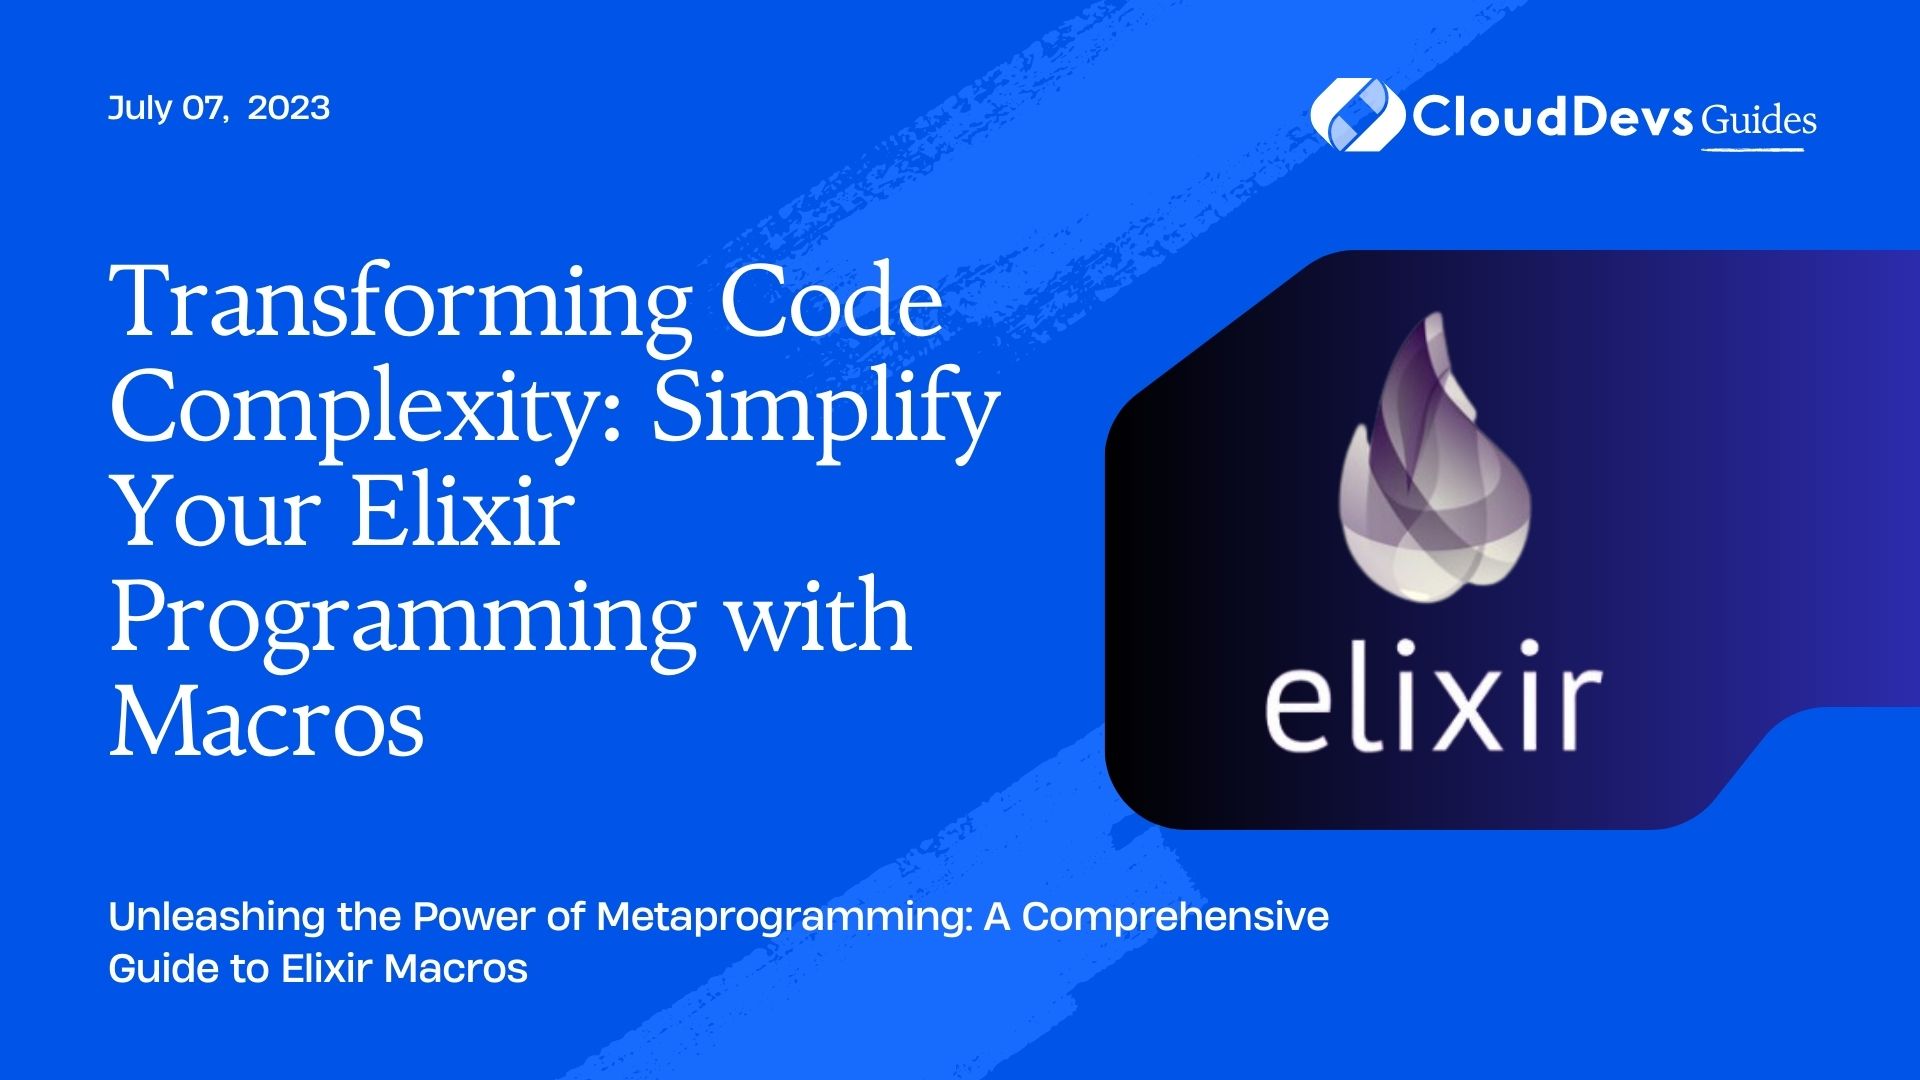 Transforming Code Complexity: Simplify Your Elixir Programming with Macros